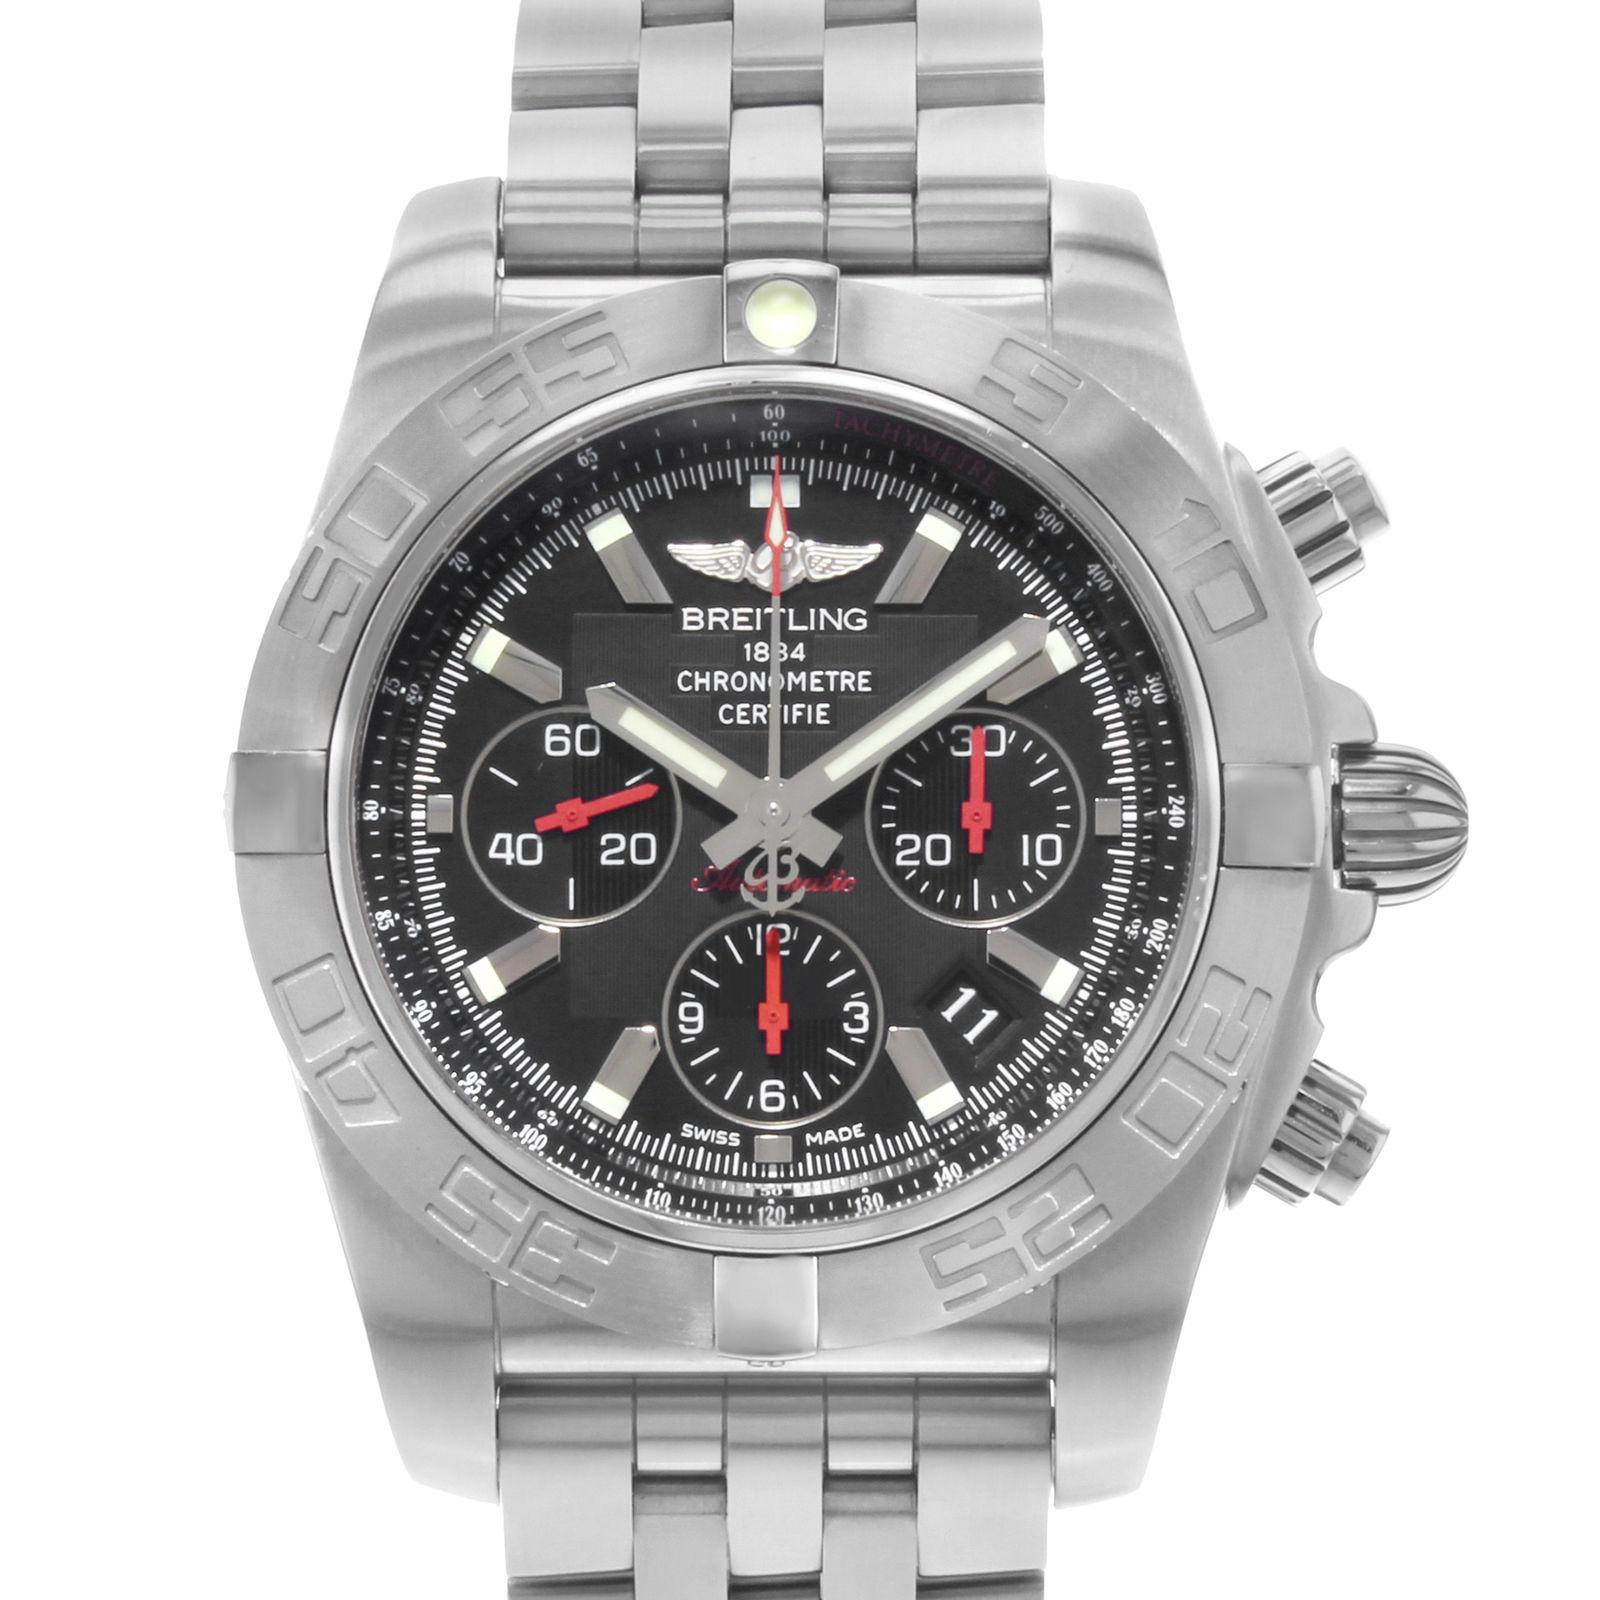 (18397)
This display model Breitling Chronomat AB011110/BA50-377A is a beautiful Gents timepiece that is powered by an automatic movement which is cased in a stainless steel case. It has a round shape face, chronograph, date, small seconds subdial